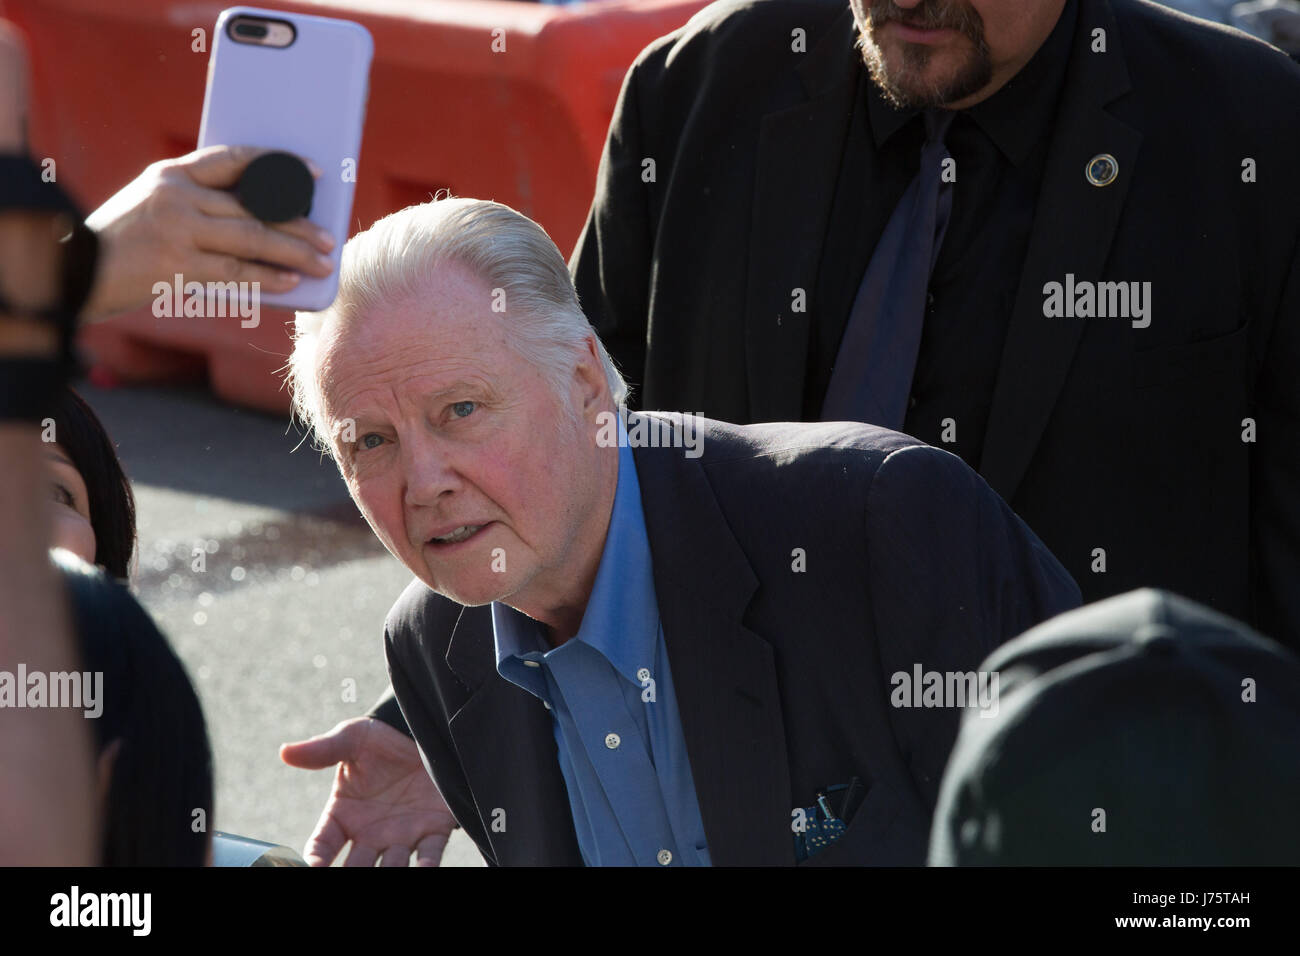 Jon Voight attends the premiere of Disney's 'Pirates Of The Caribbean: Dead Men Tell No Tales' at Dolby Theatre on May 18, 2017 in Hollywood, California Stock Photo